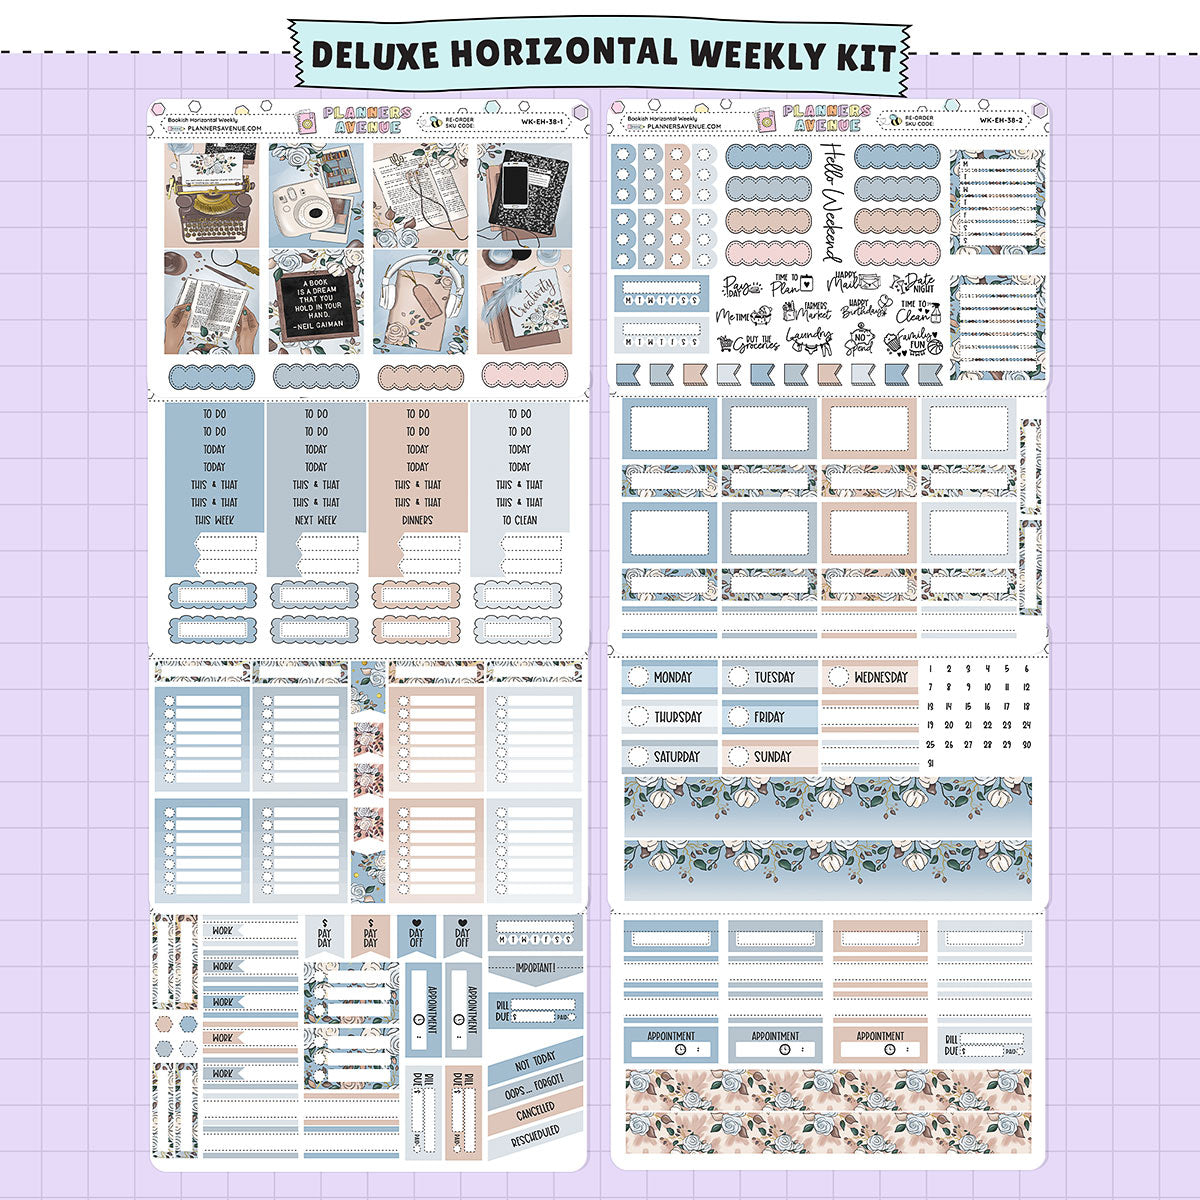 Bookish Horizontal Weekly Sticker Foiled Kit (SILVER FOIL)